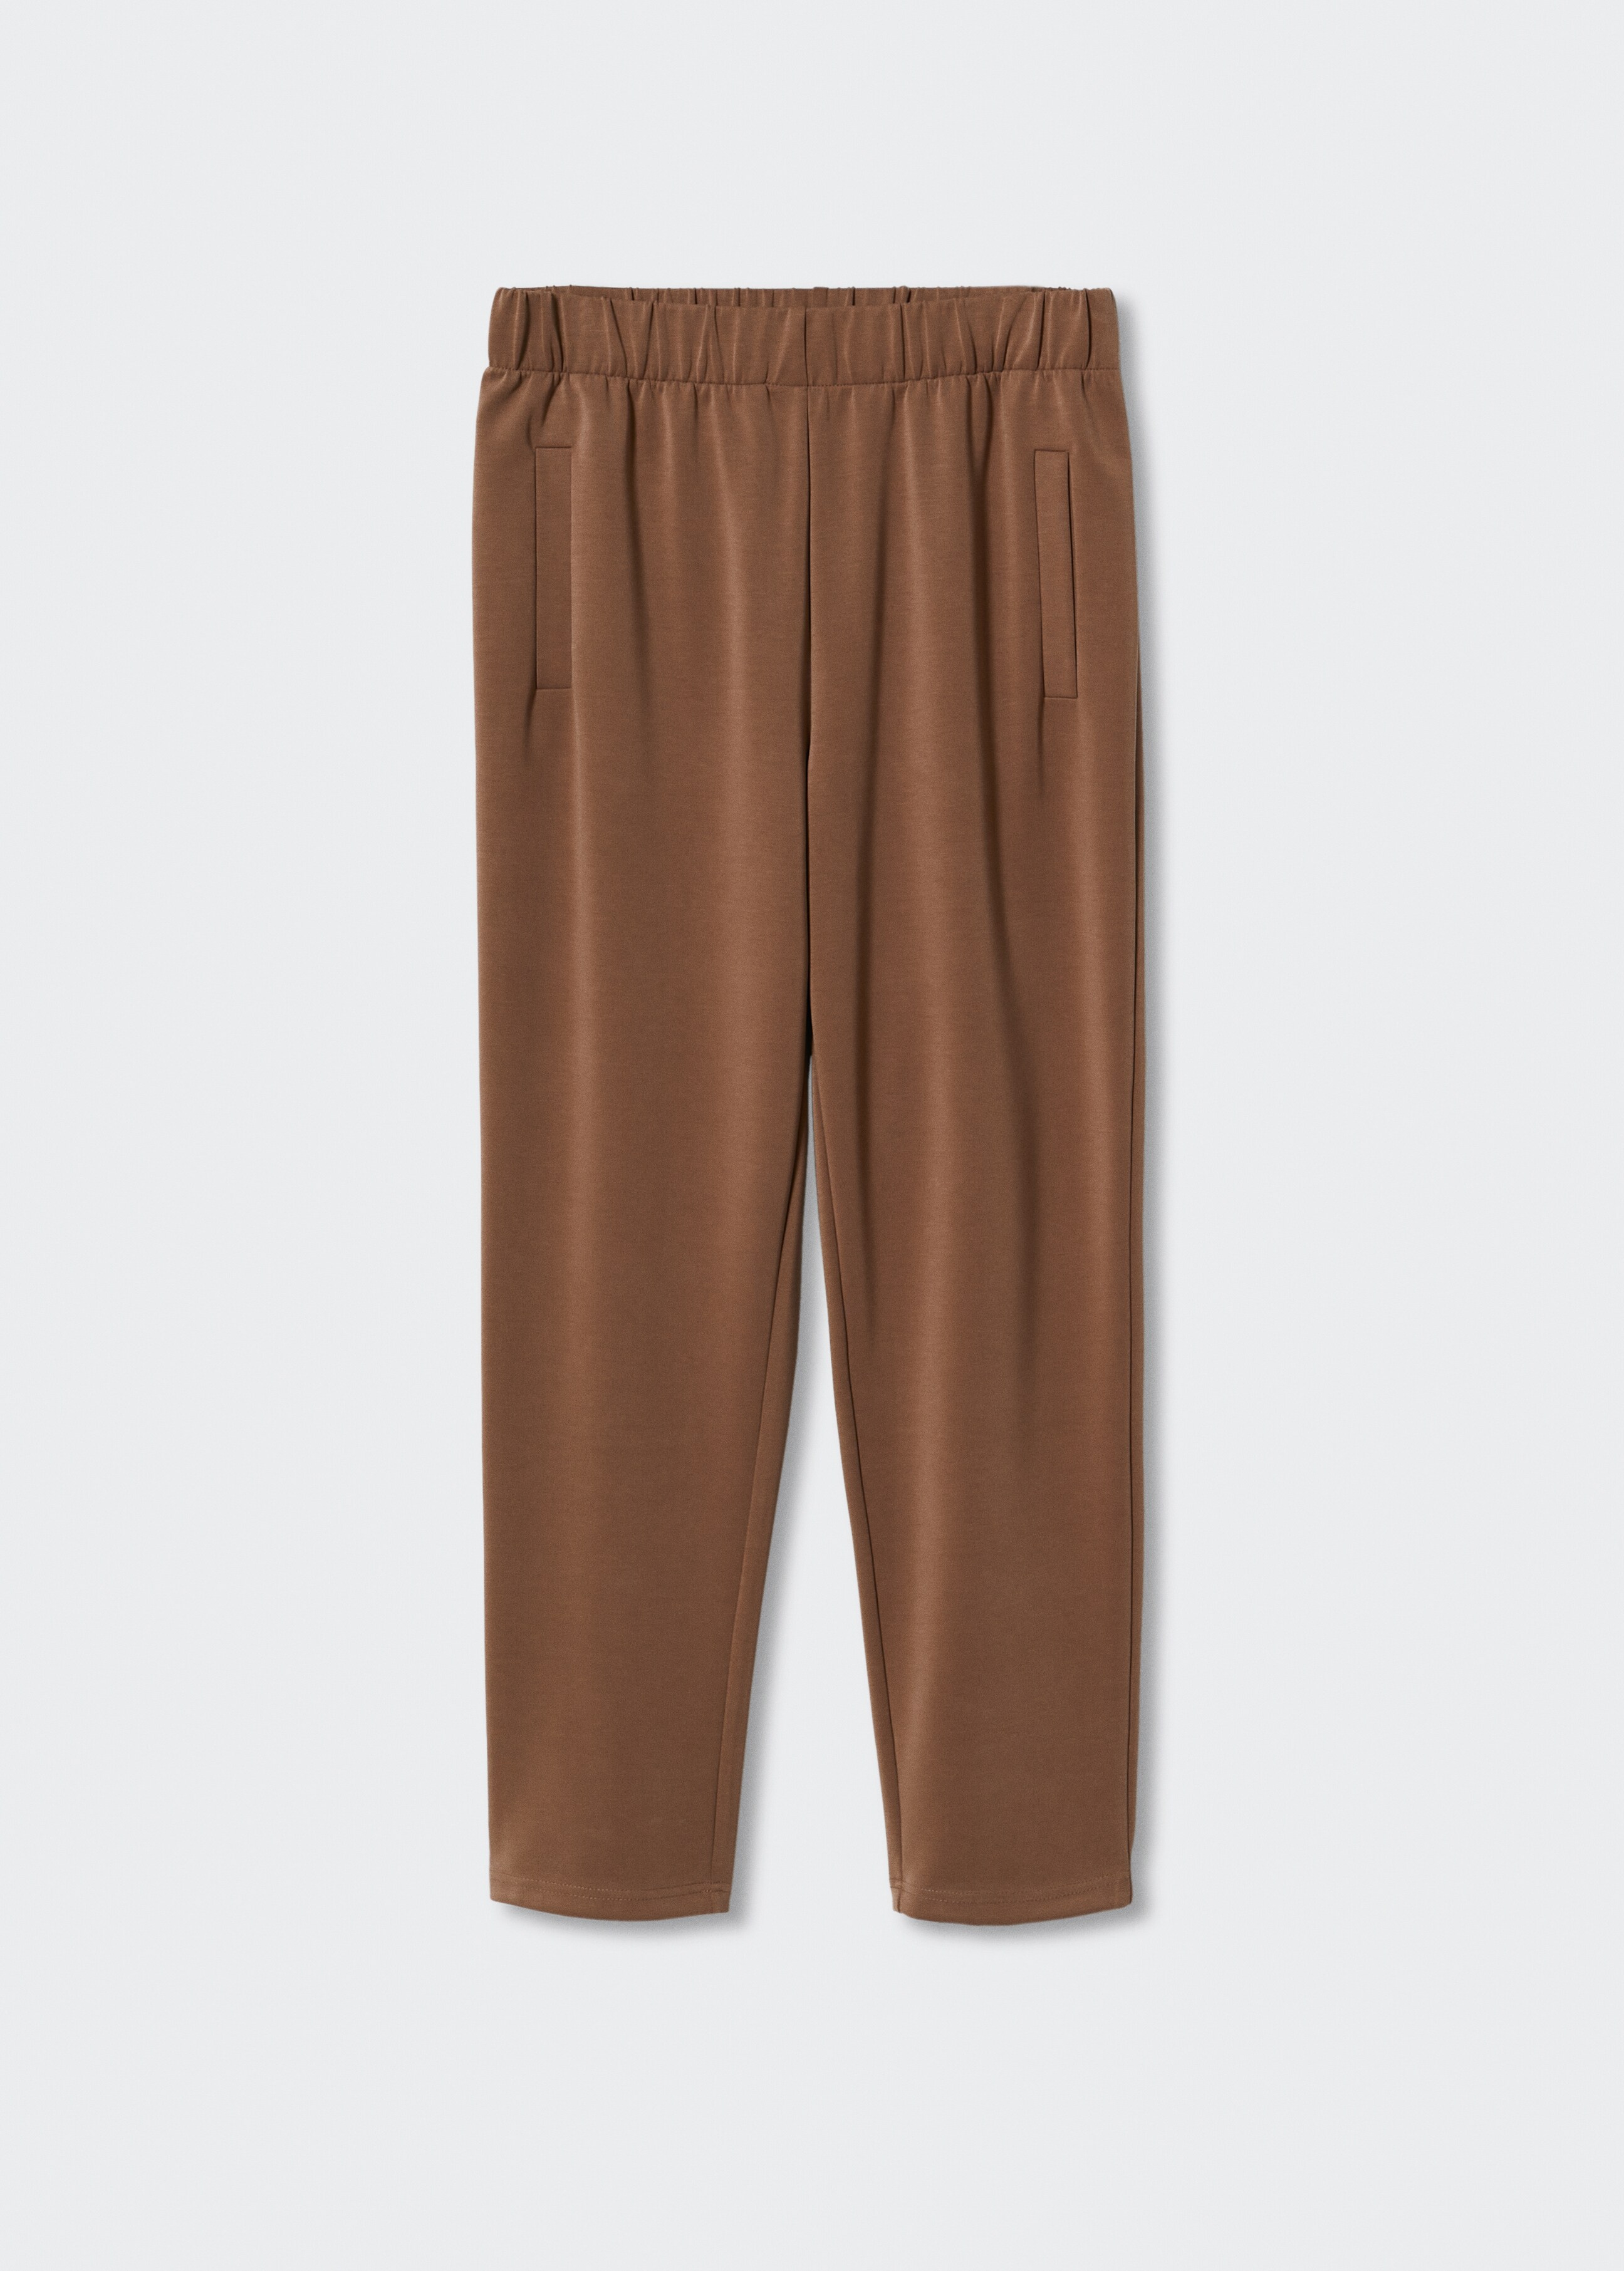 Pocket jogger trousers - Article without model